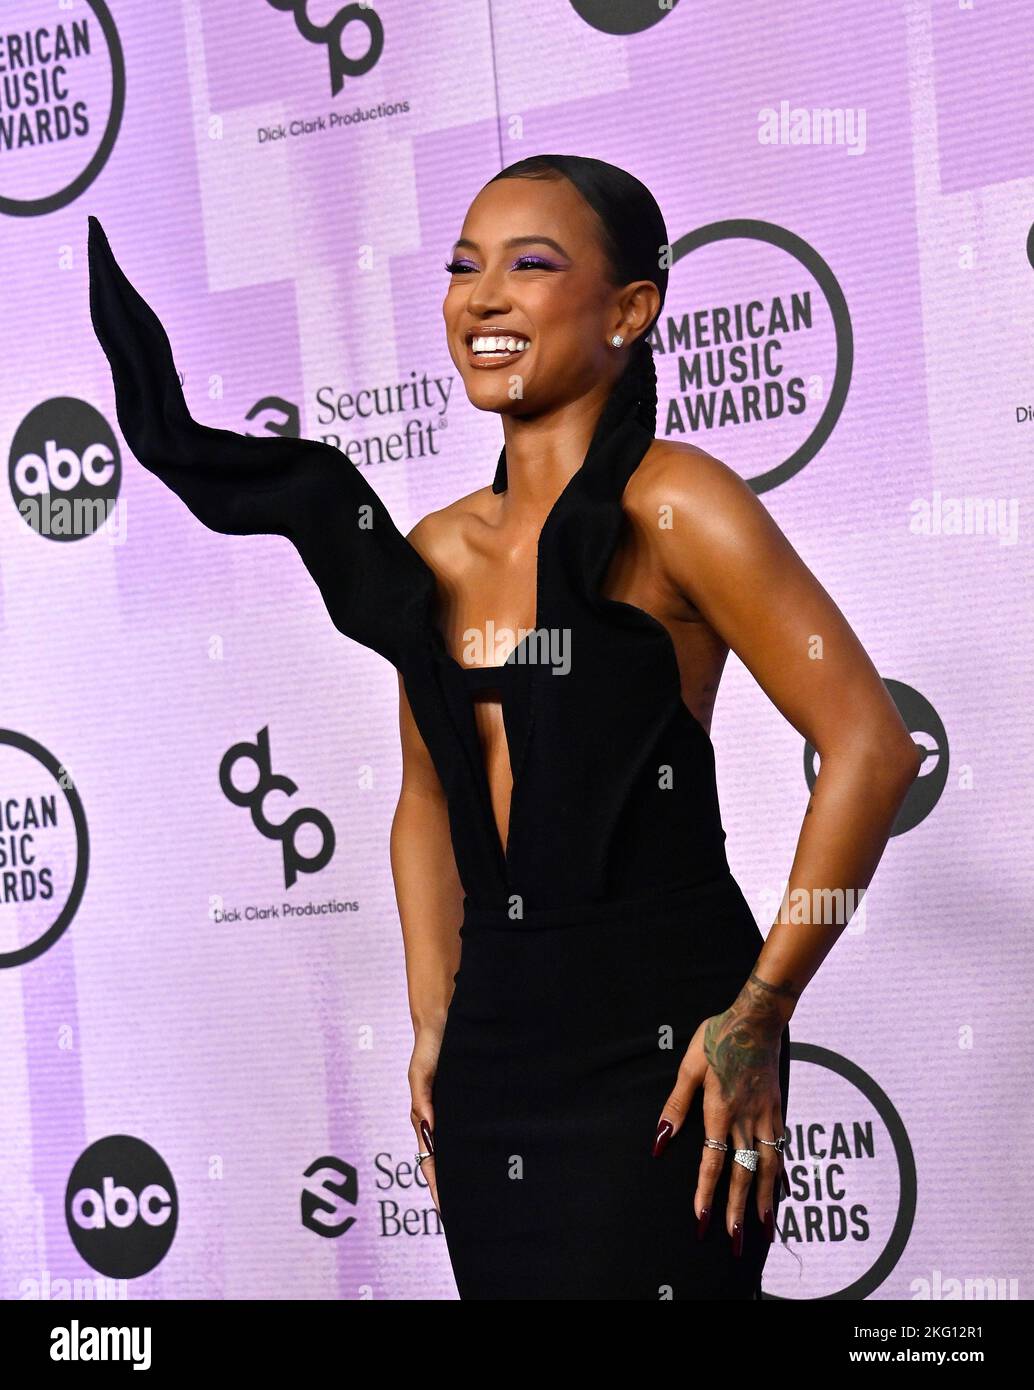 Los Angeles, United States. 20th Nov, 2022. Karrueche Tran arrives for the 50th annual American Music Awards at the Microsoft Theater in Los Angeles on Sunday, November 20, 2022. Photo by Jim Ruymen/UPI Credit: UPI/Alamy Live News Stock Photo